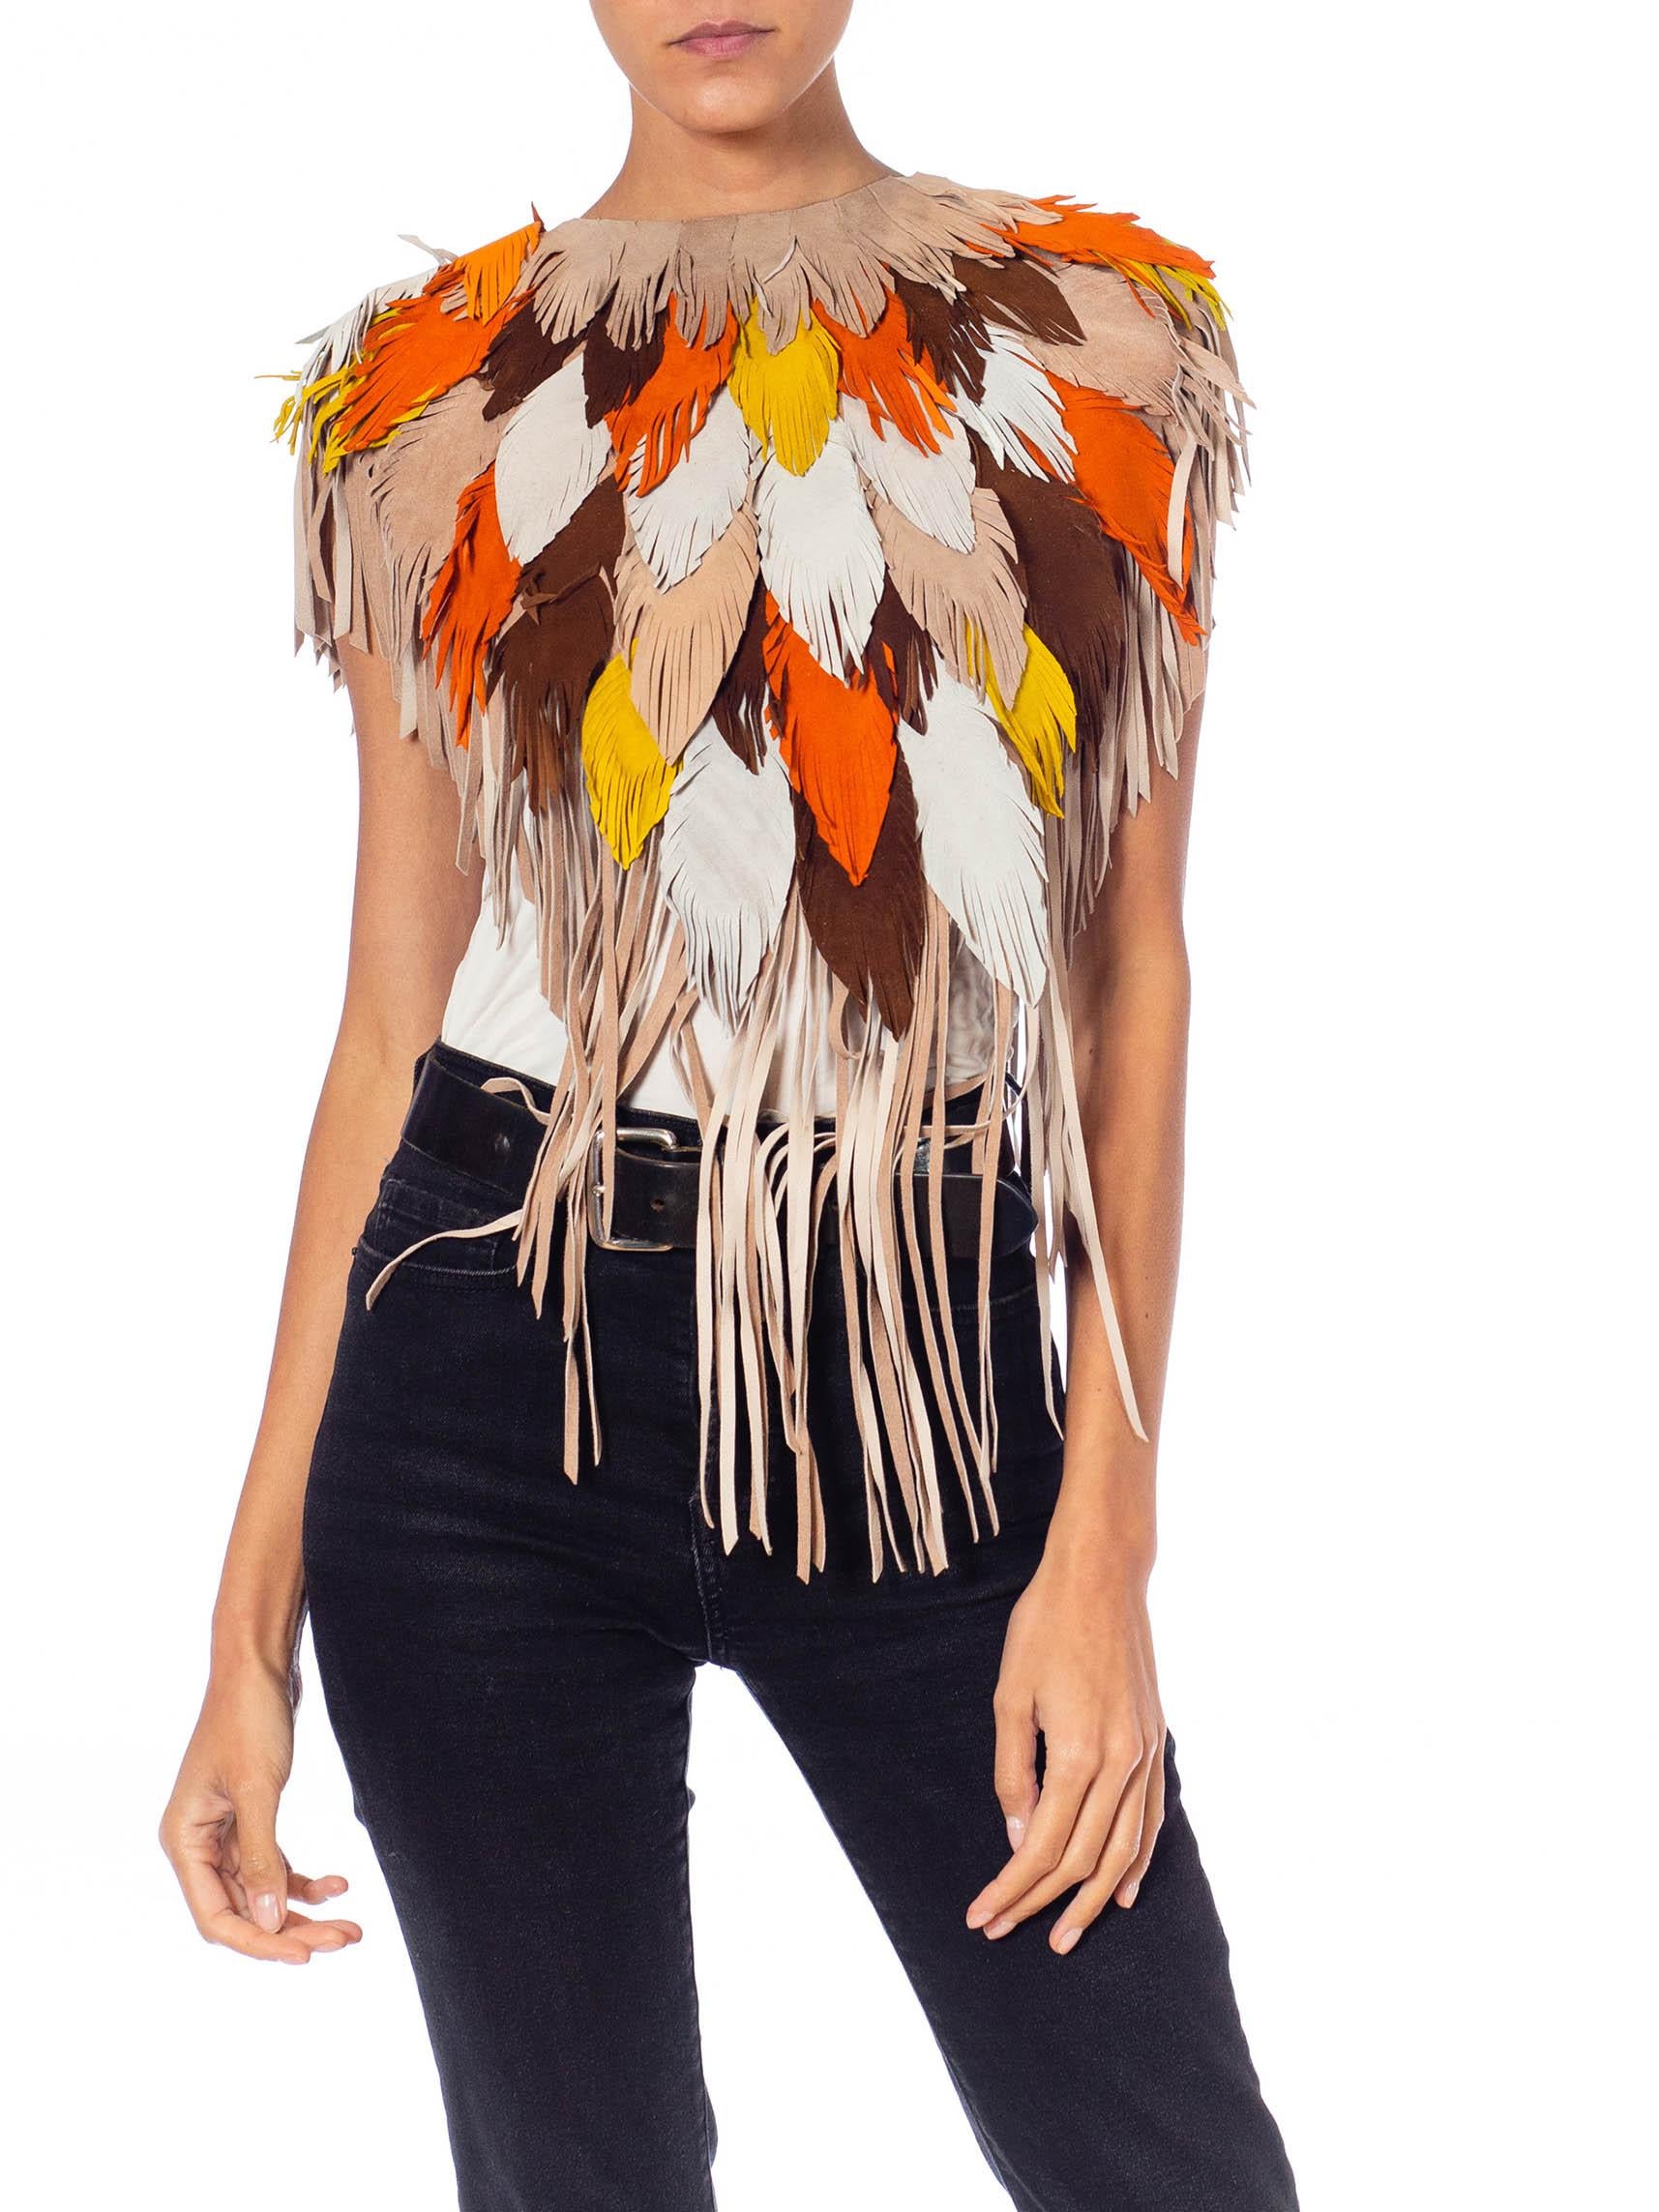 MORPHEW COLLECTION Phoenix Sunset Suede Fringe Feather Leather Cape For Sale 5